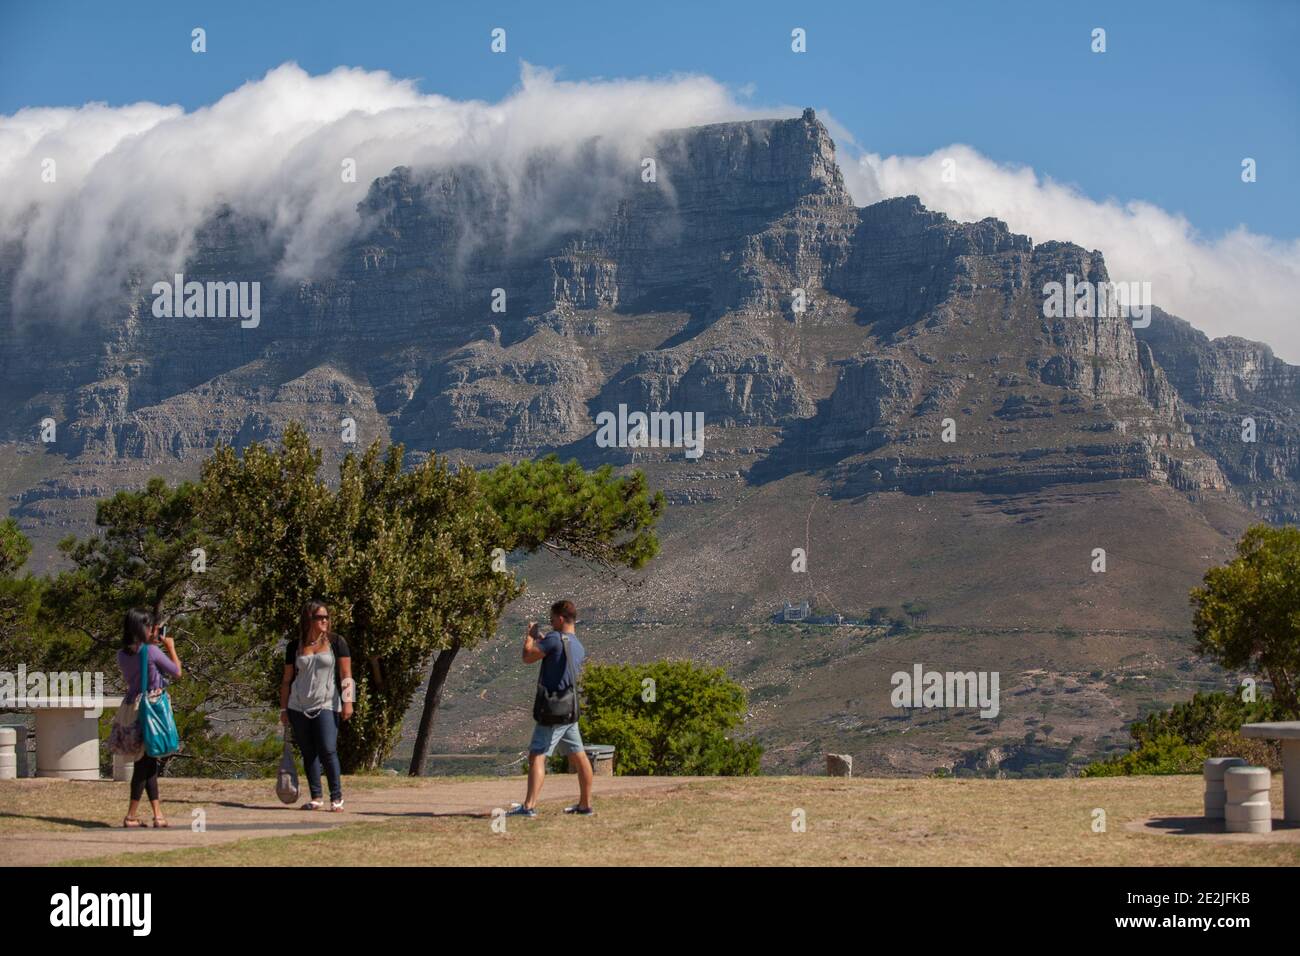 Tourists having their photograph taken with flat-topped Table Mountain tourist attraction in the distance, Cape Town, South Africa. Stock Photo